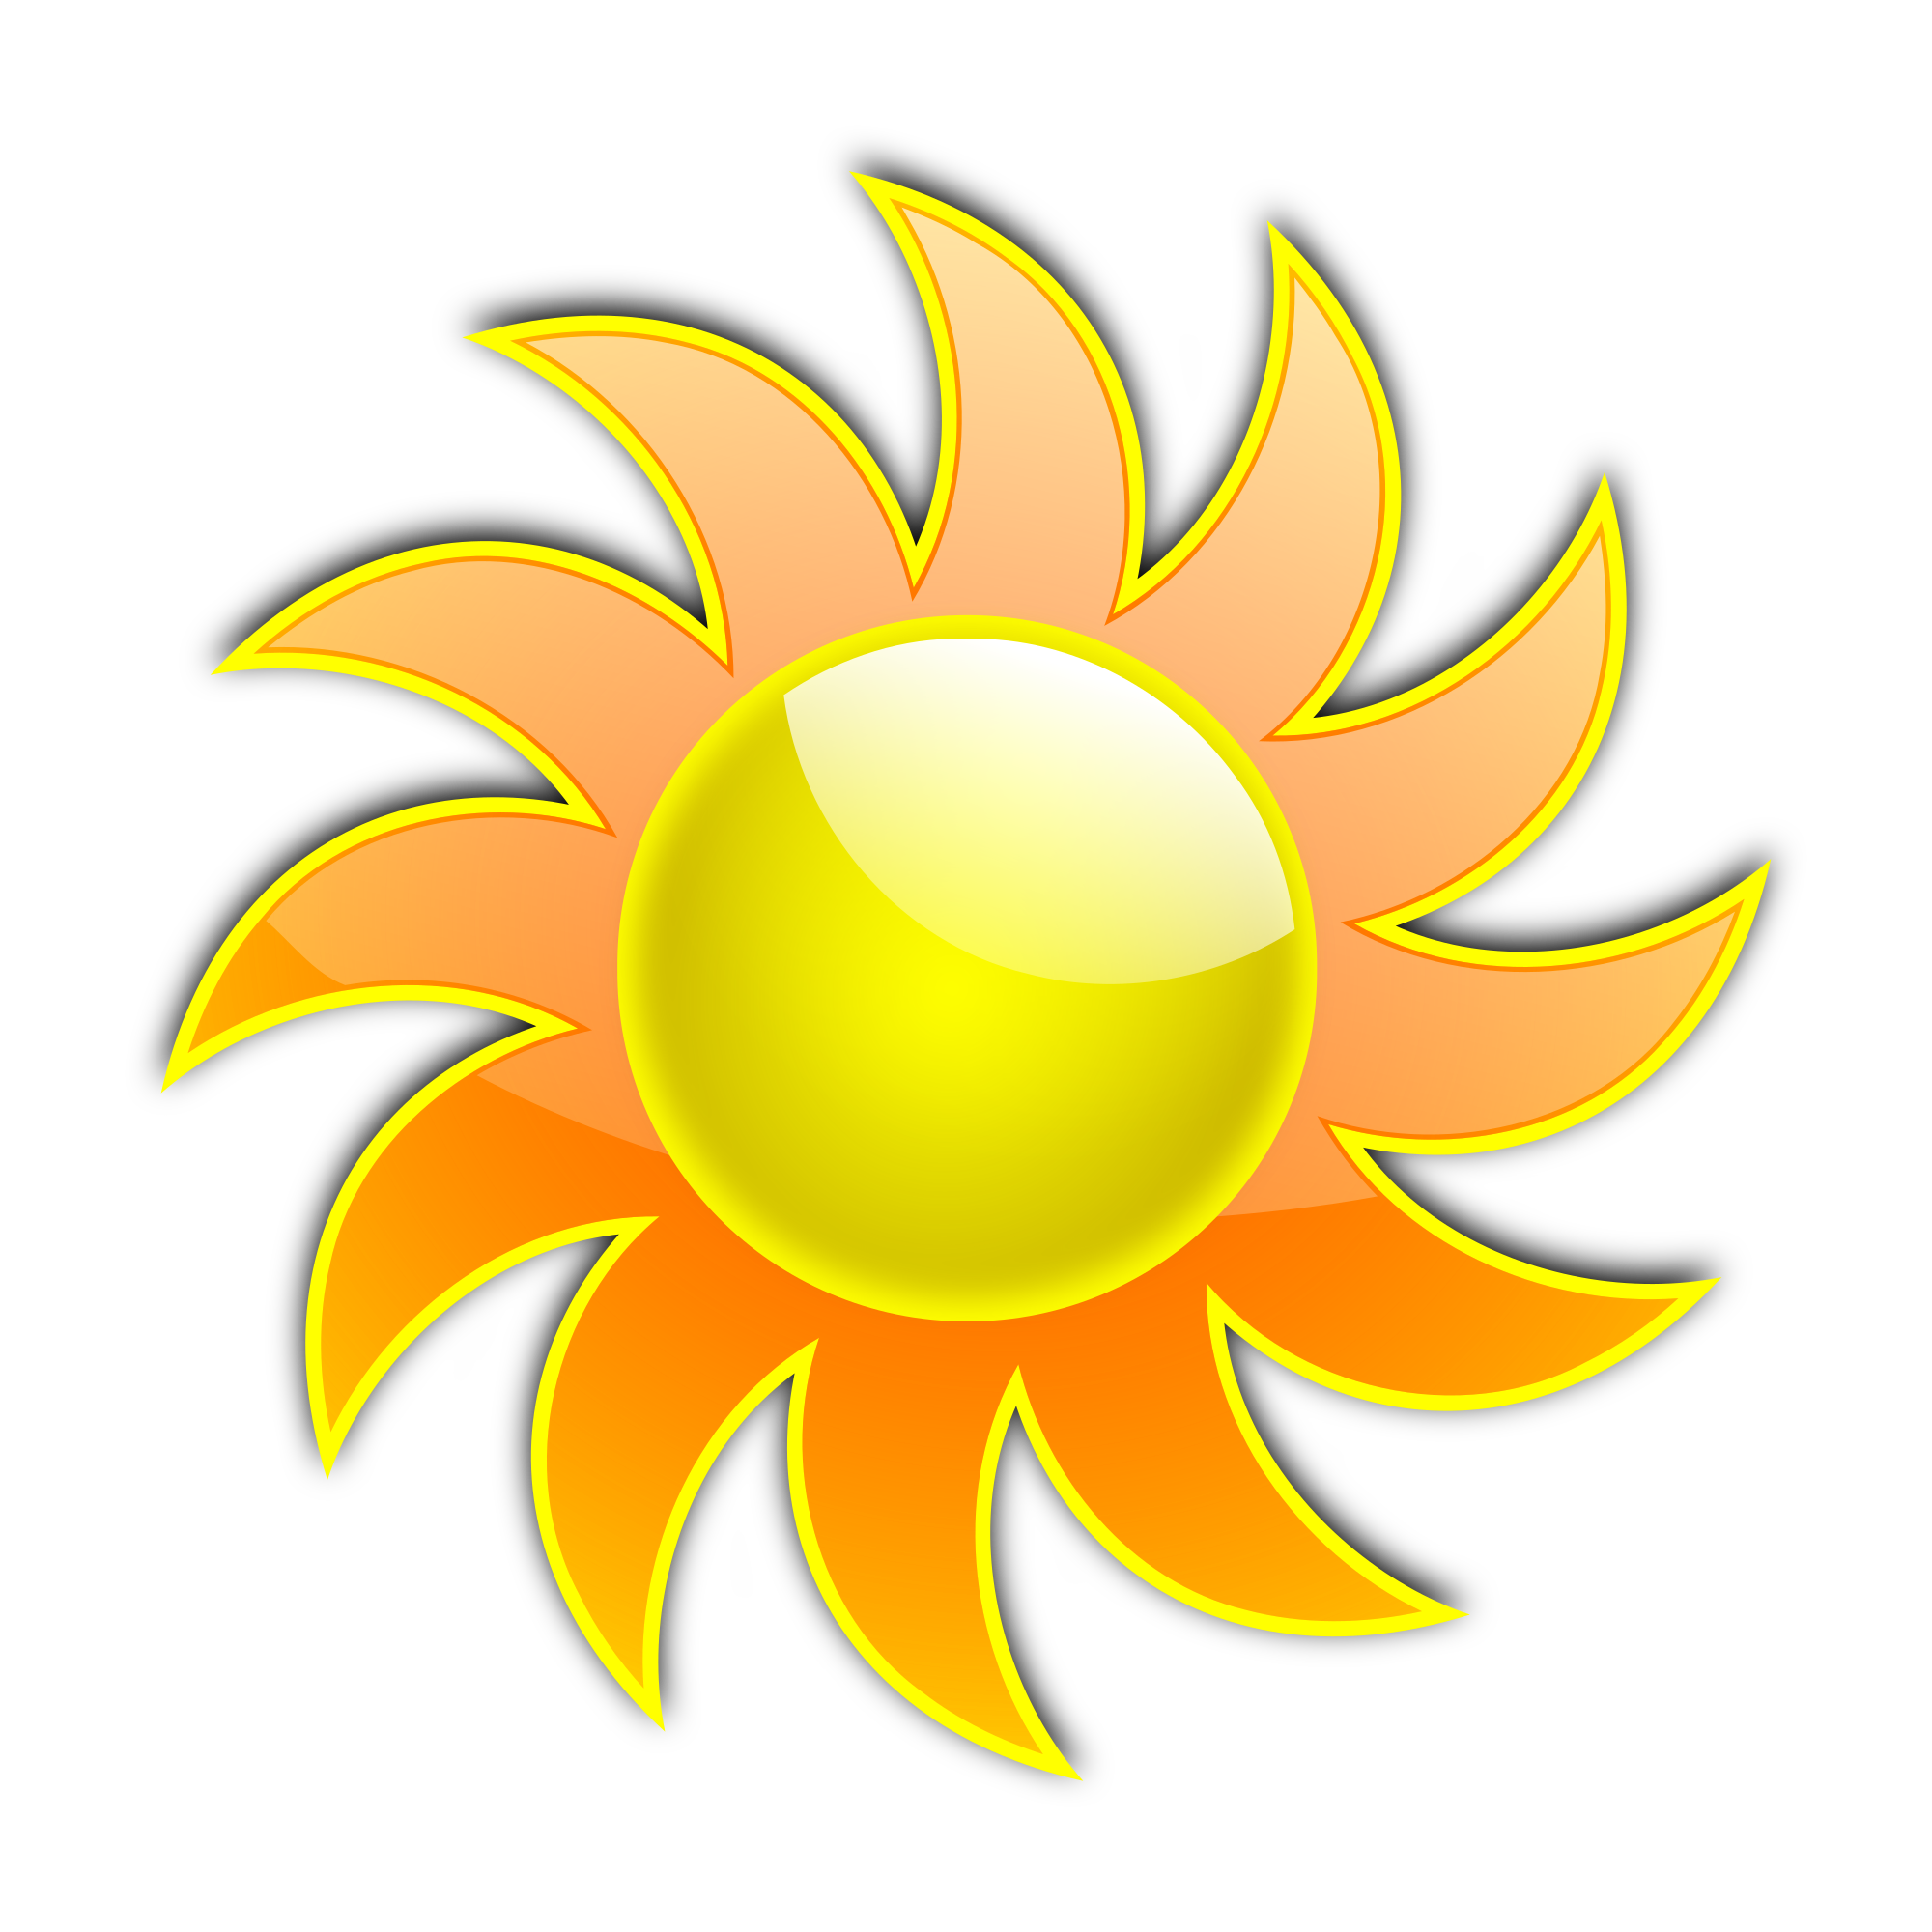 Free rolling sun clipart clipart and vector image